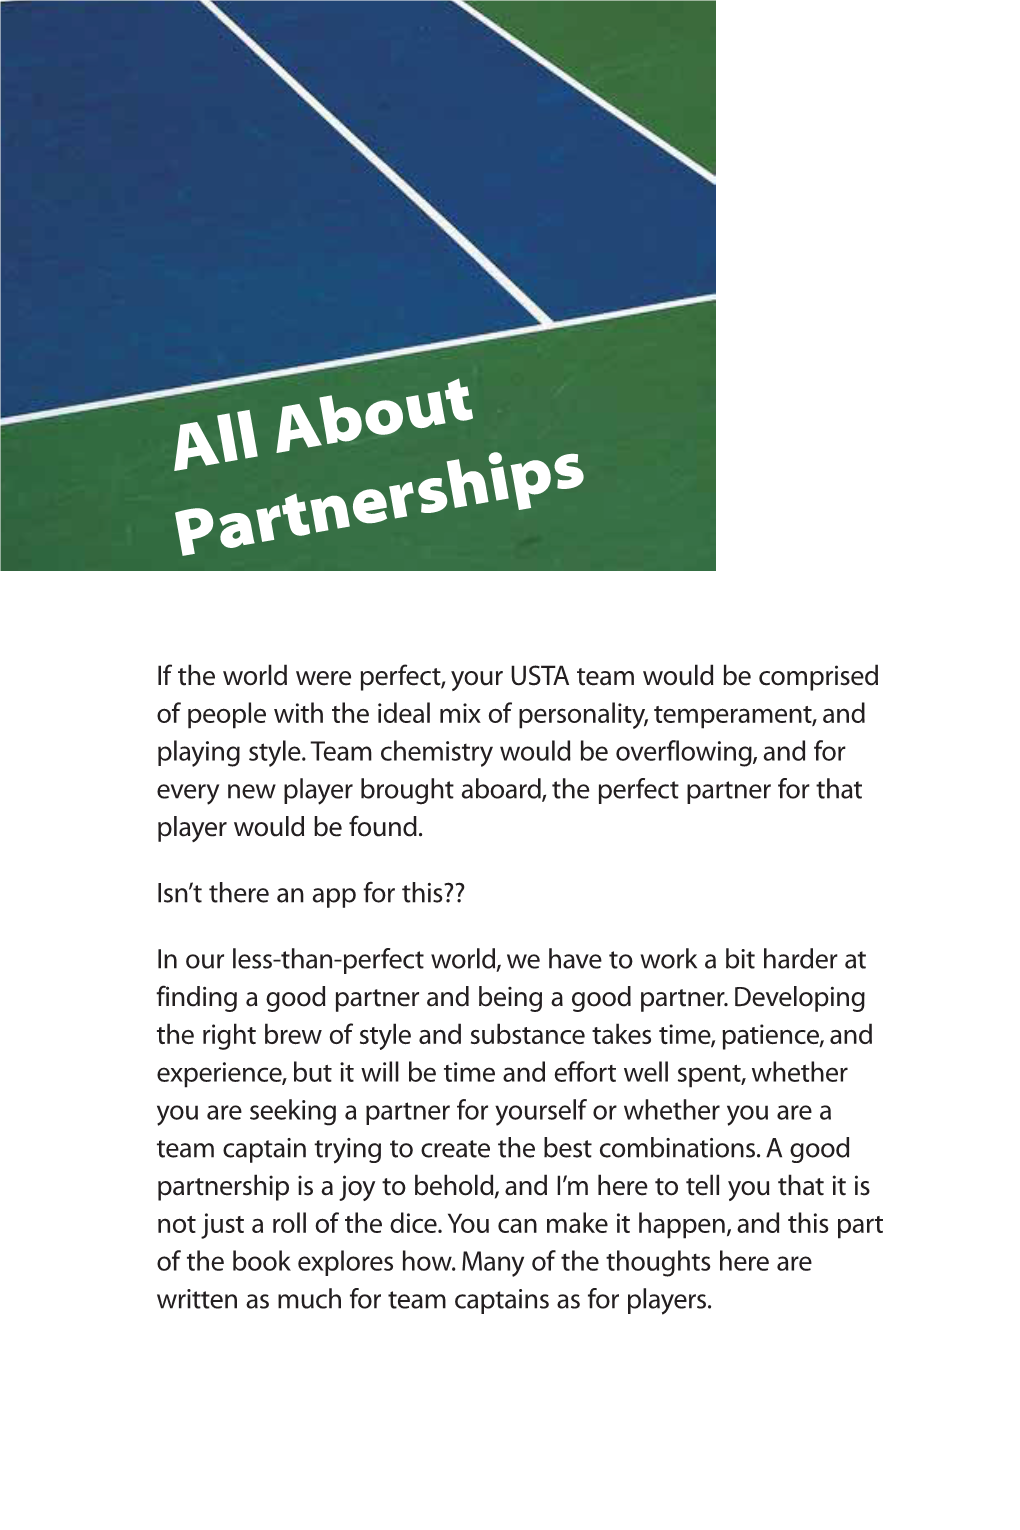 Allabout Partnerships